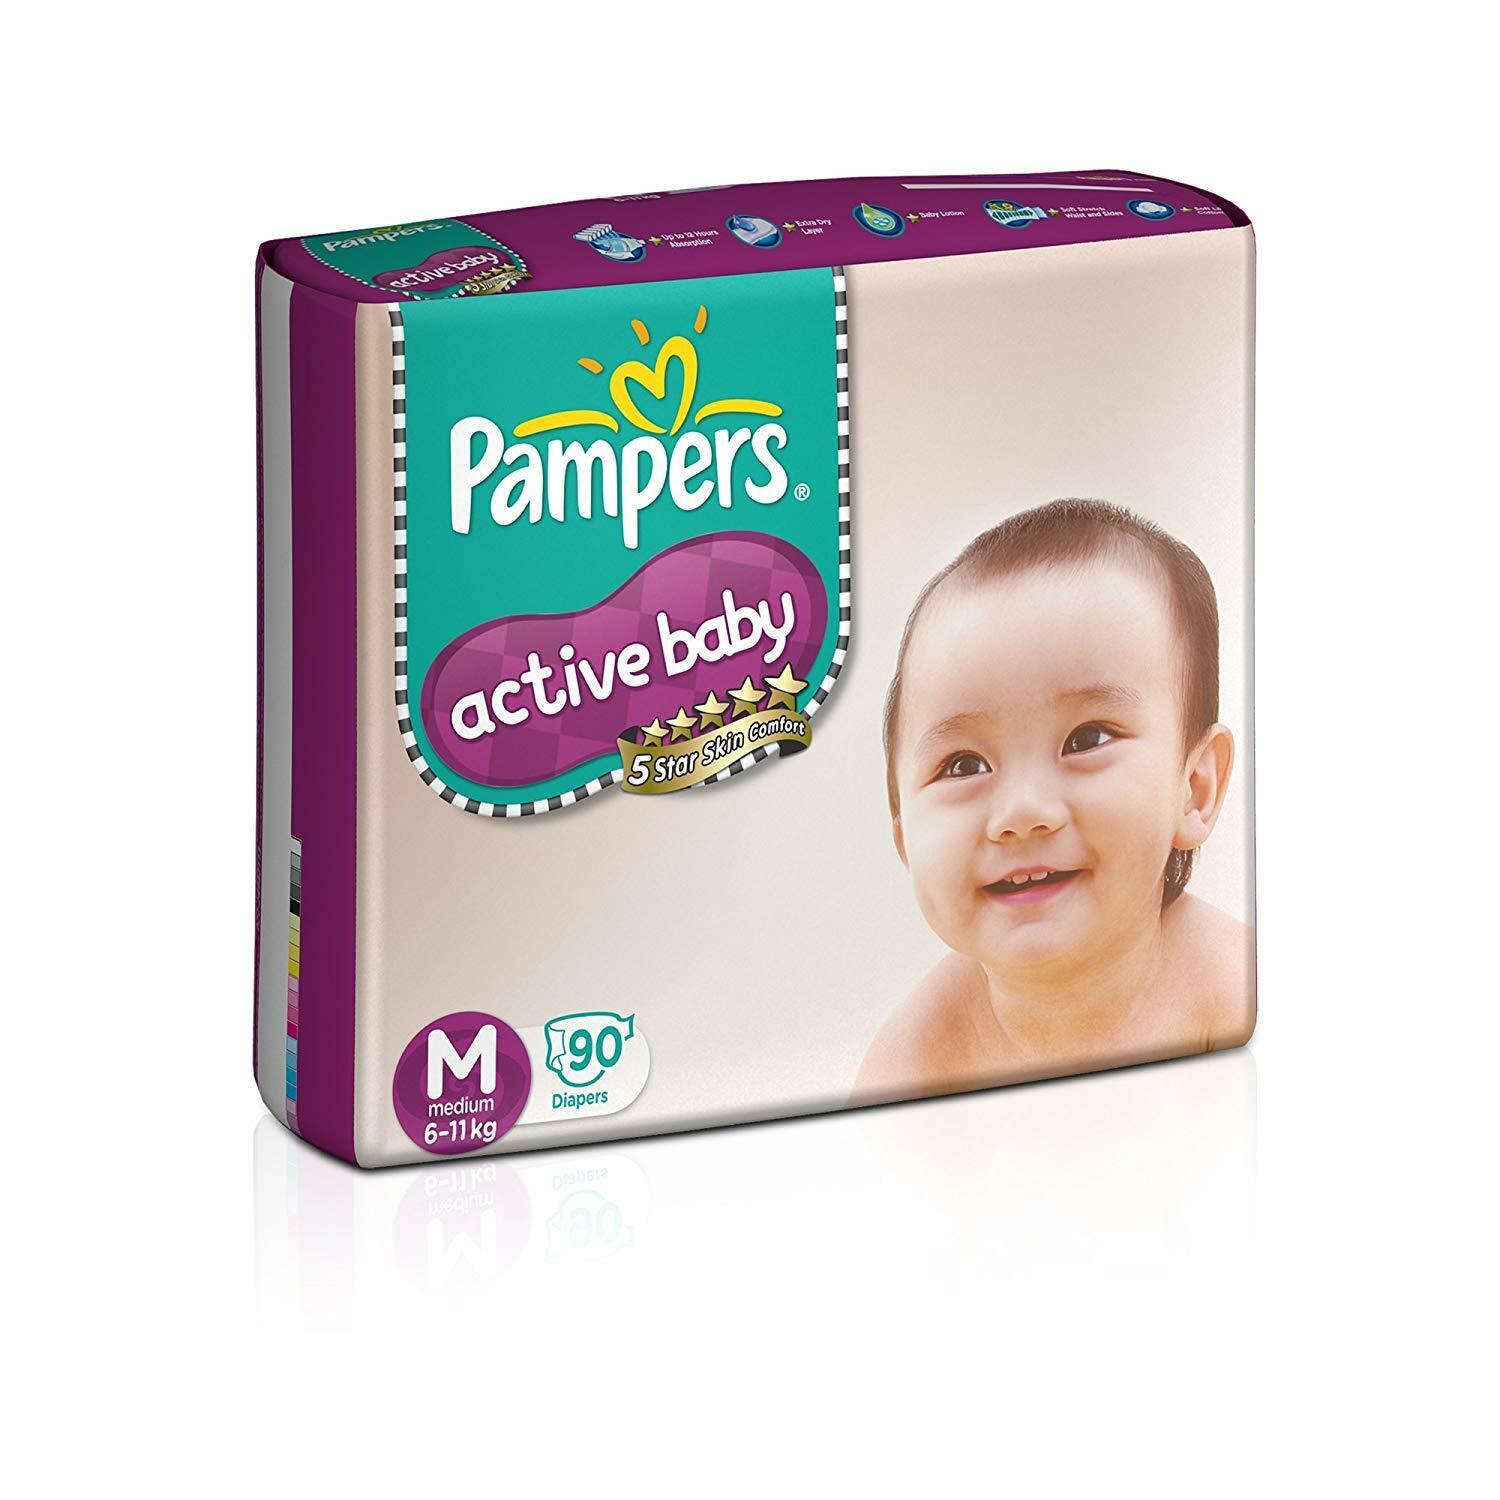 pampers stare